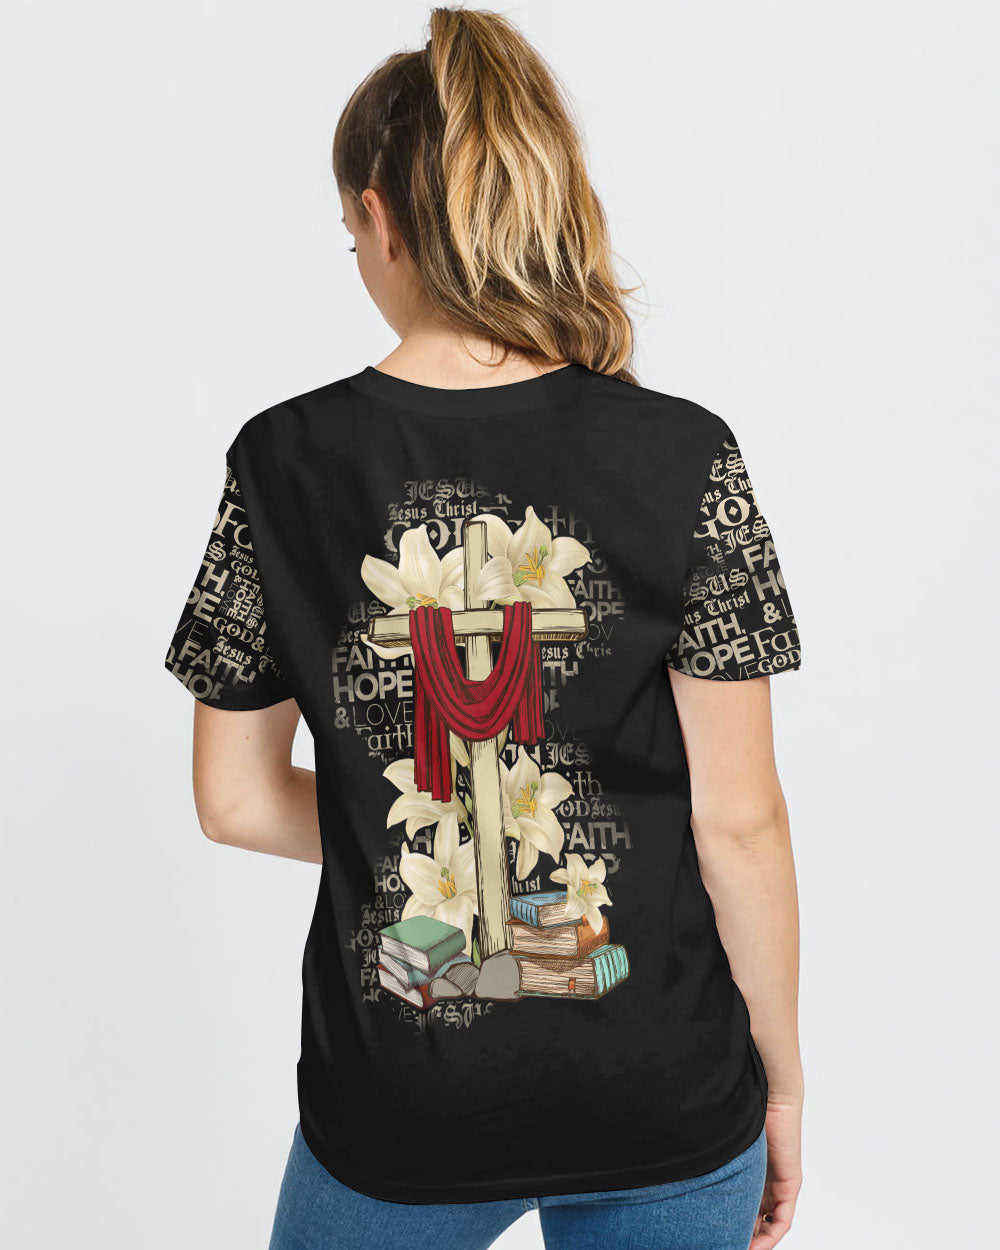 Lily Flower And Cross Book Women's Christian Tshirt